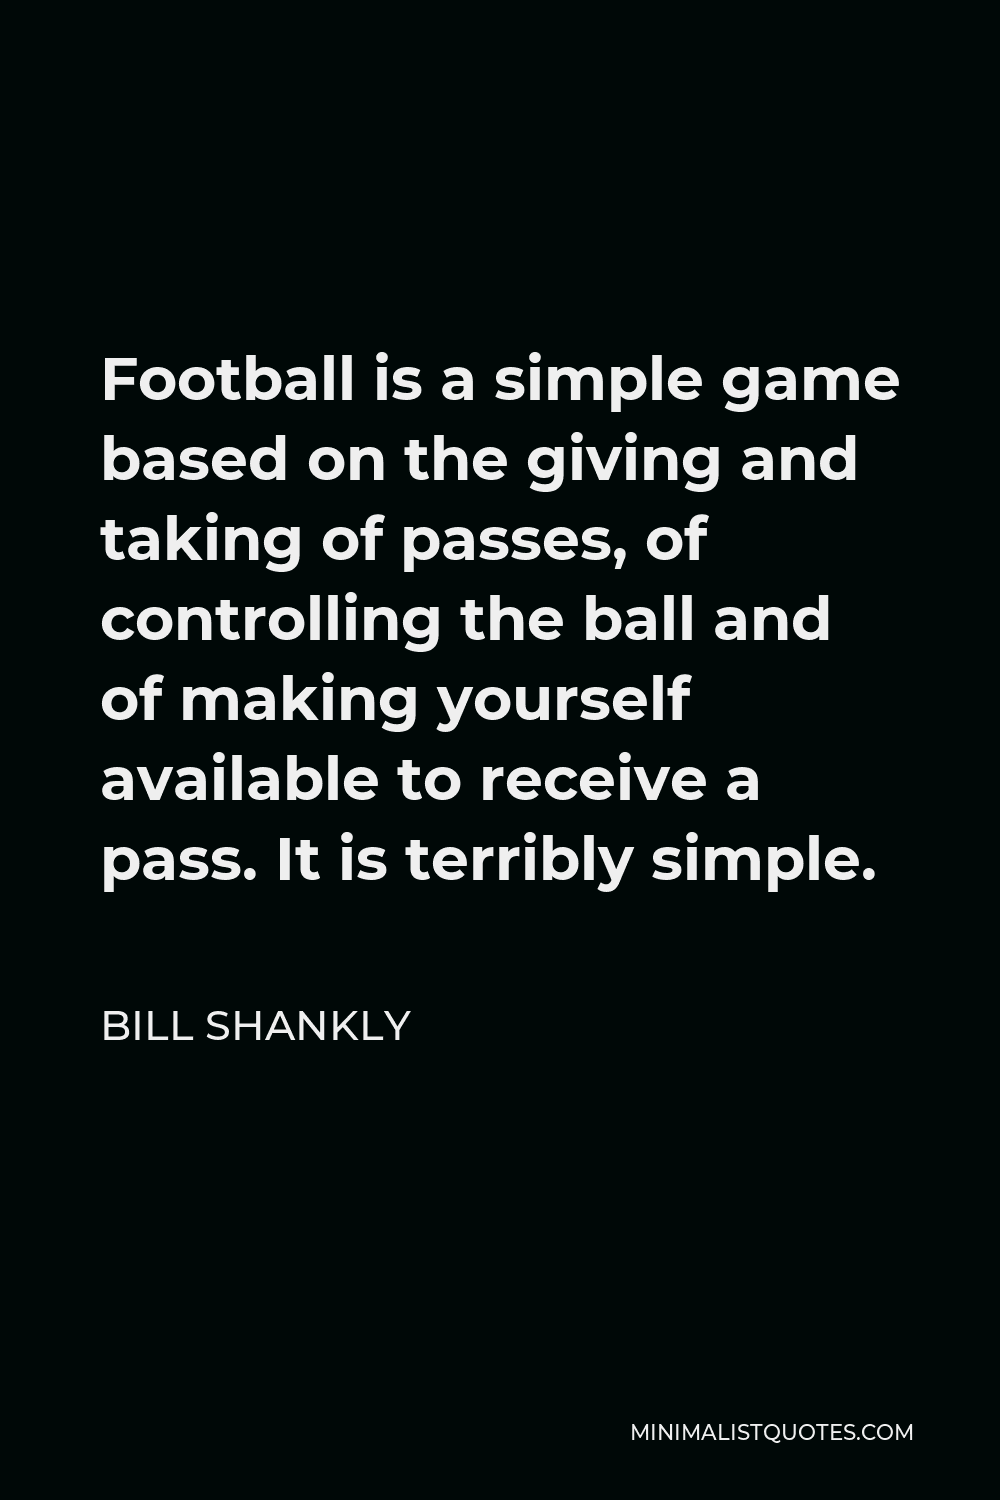 Bill Shankly Quote - Football is a simple game based on the giving and taking of passes, of controlling the ball and of making yourself available to receive a pass. It is terribly simple.